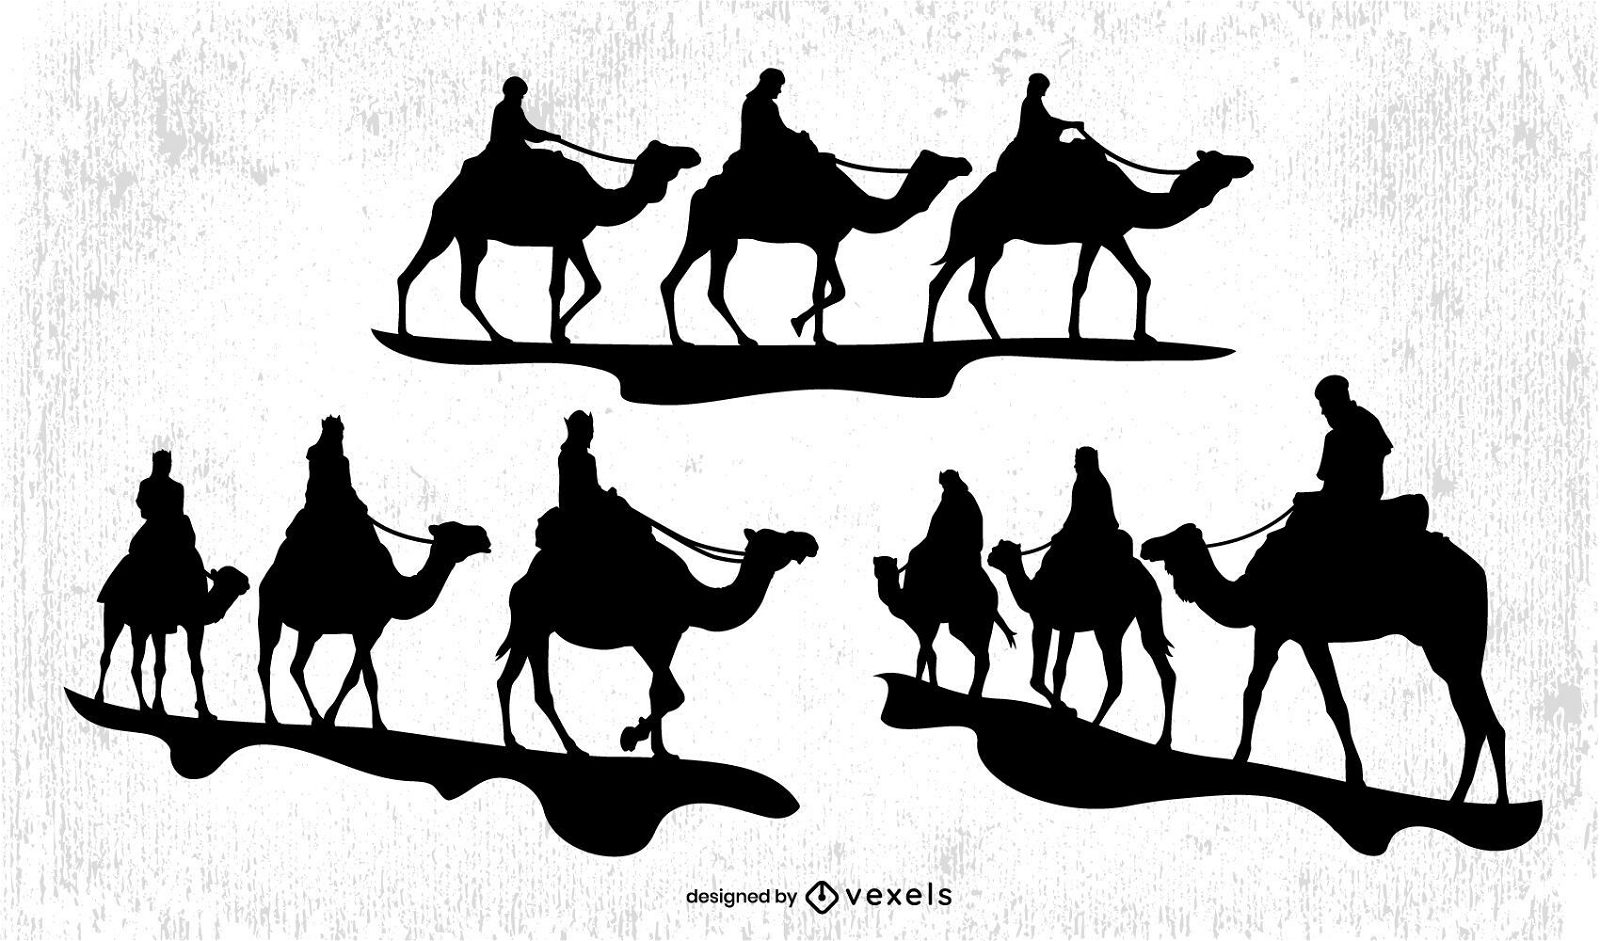 Wise men on camels silhouette set